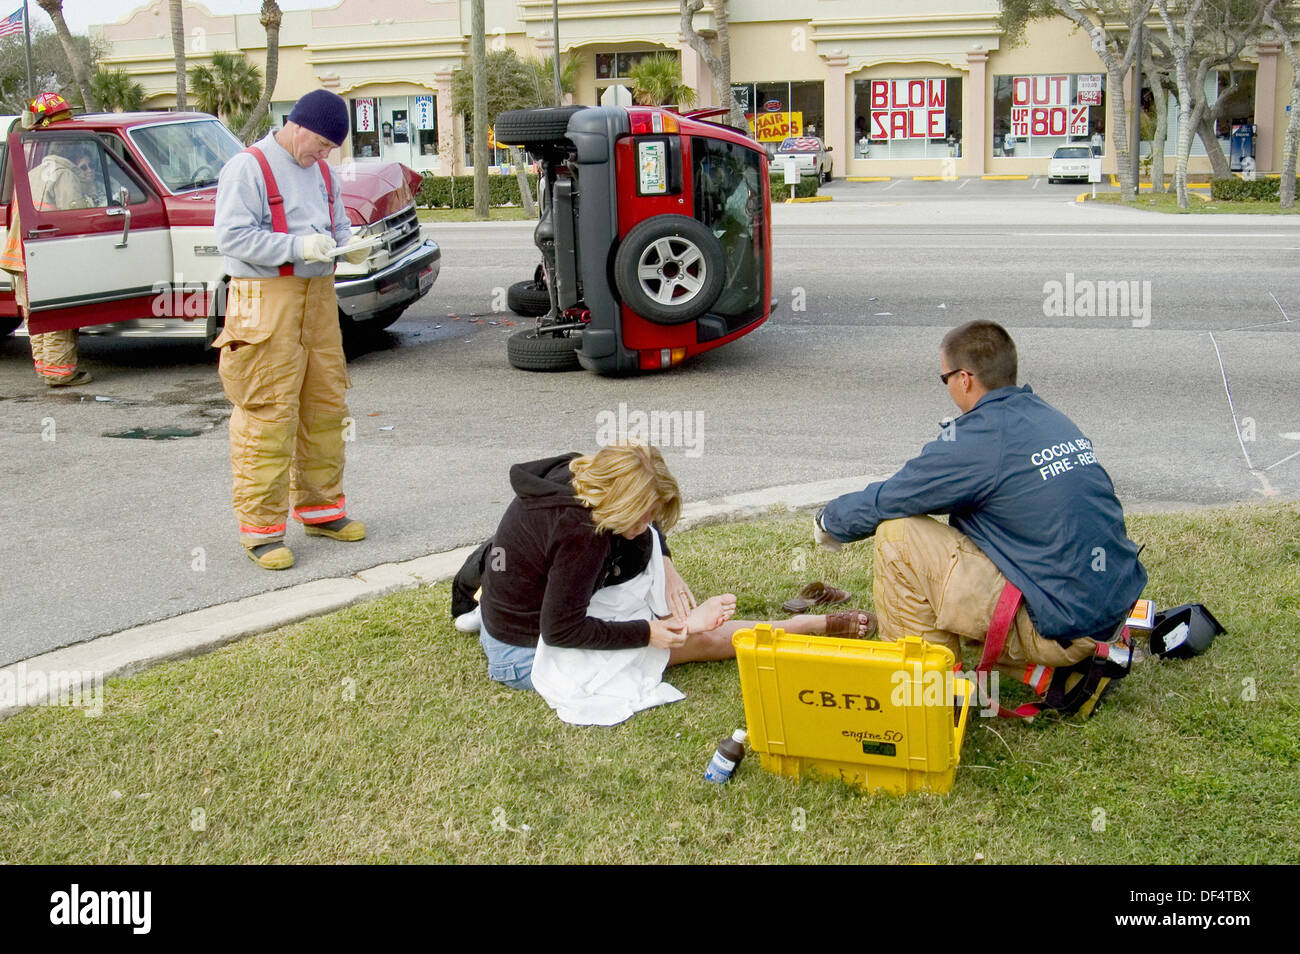 Firemen, police, and medical personel assist injured people at automobile accident Stock Photo